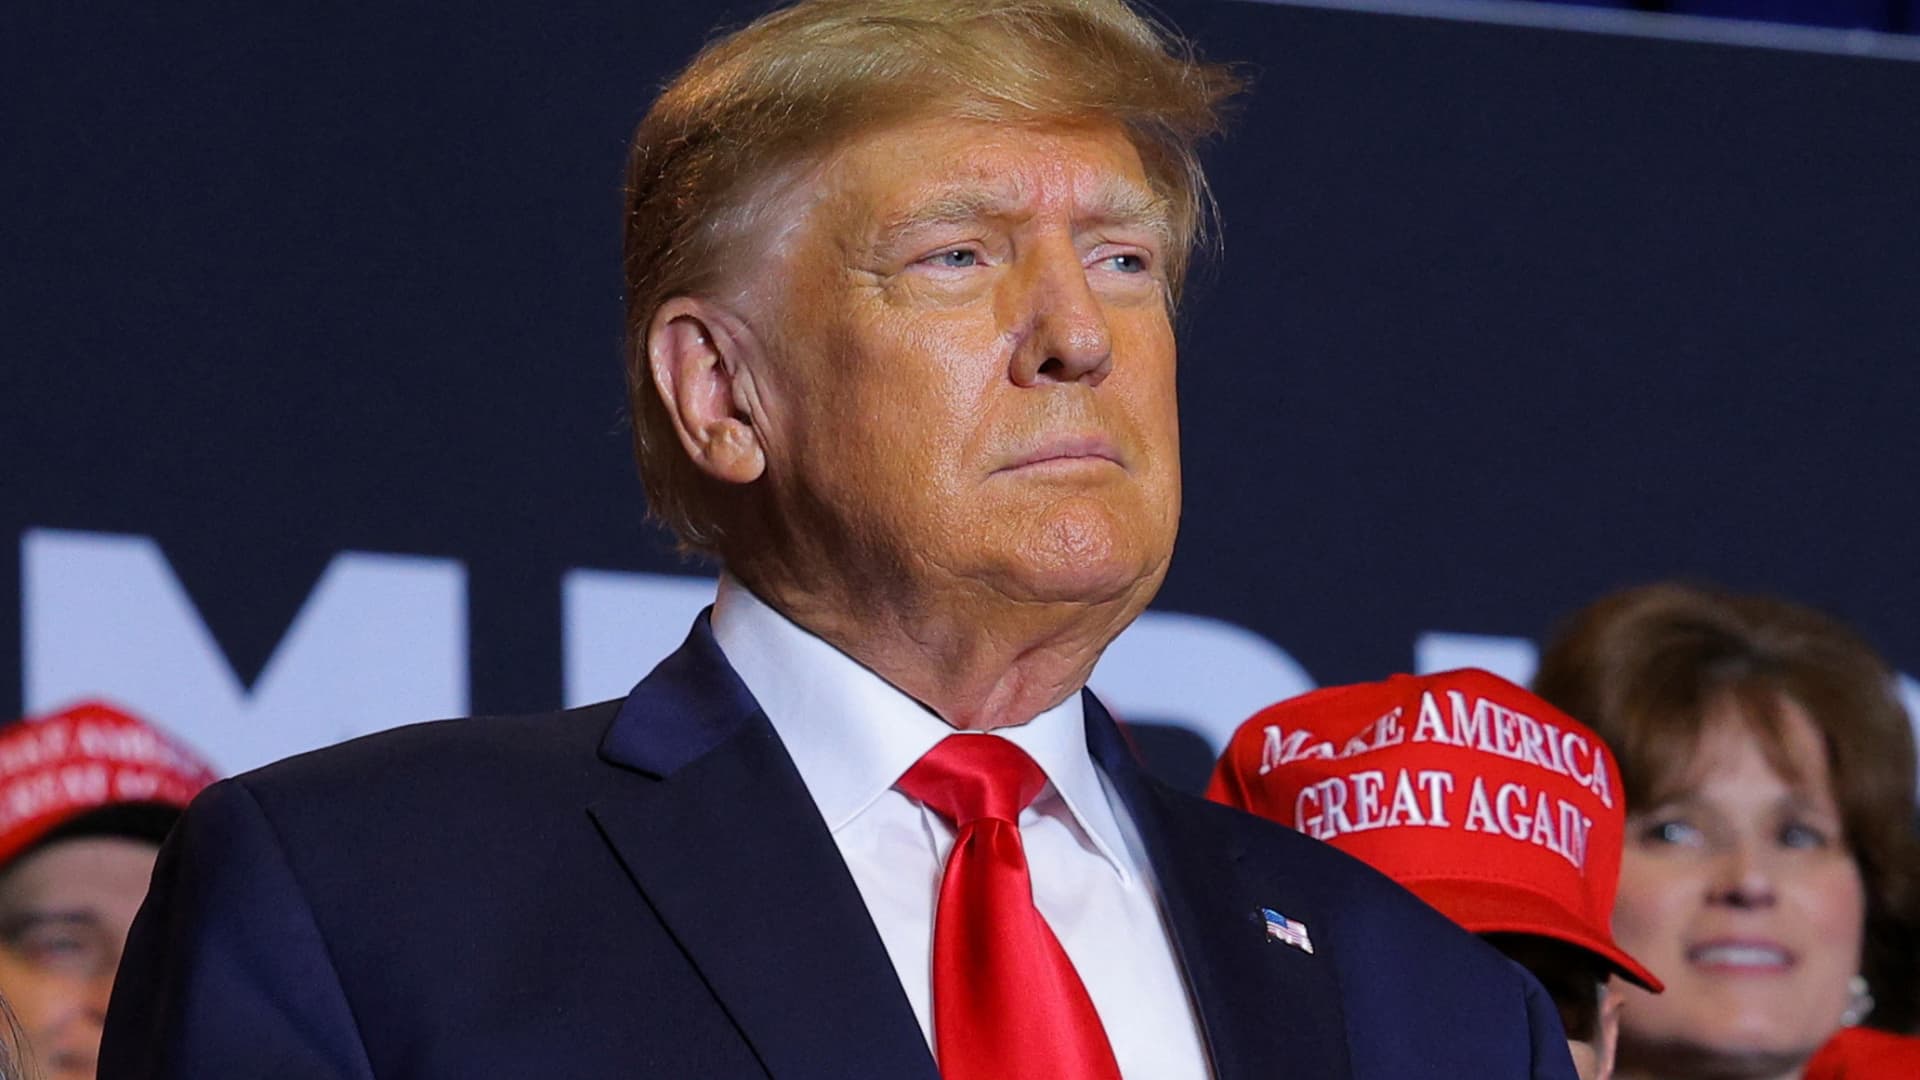 Former U.S. President and Republican presidential candidate Donald Trump speaks at a campaign event in Manchester, New Hampshire, U.S., April 27, 2023. 